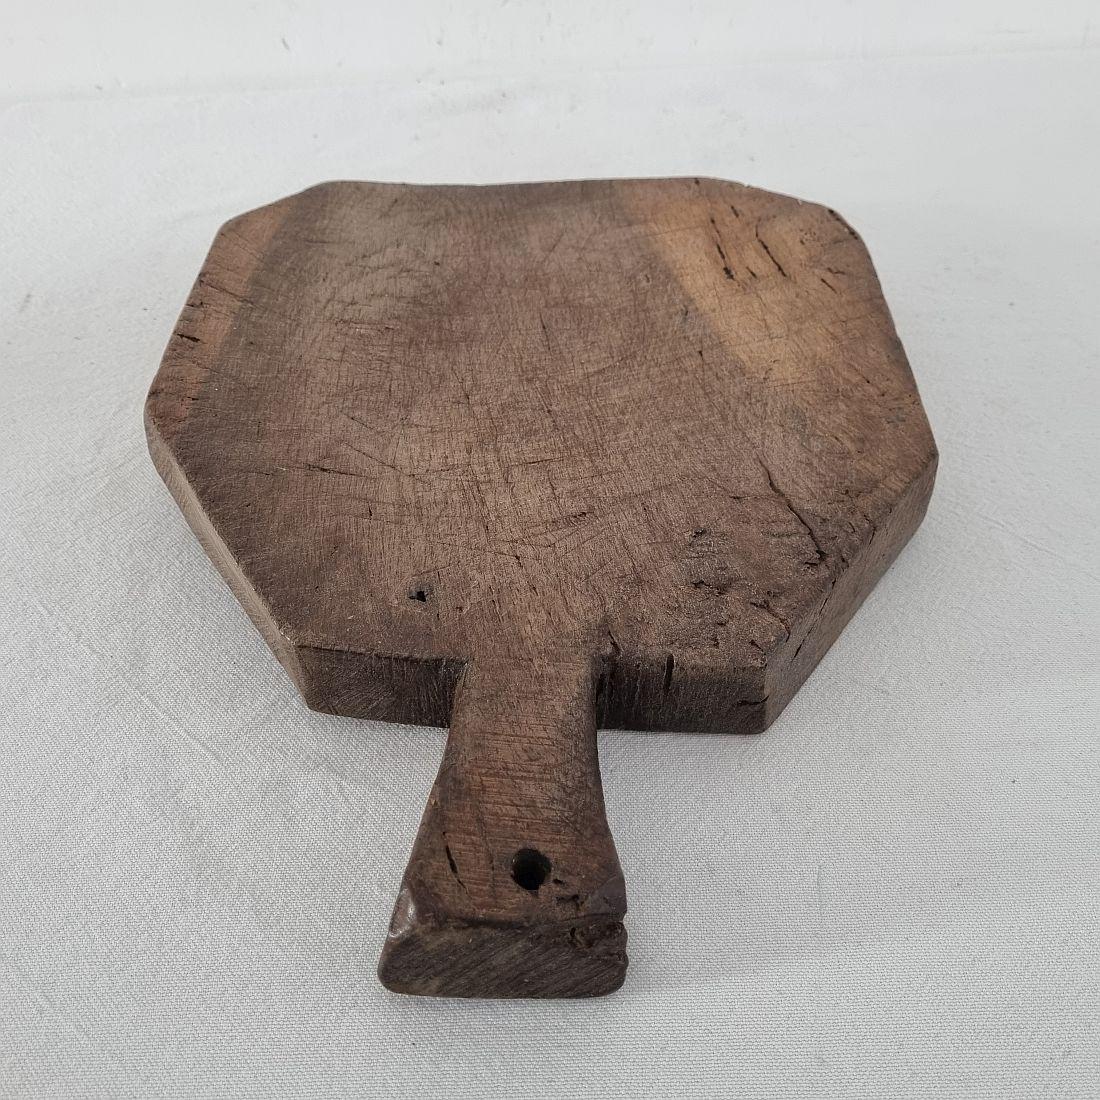 French 19th Century, Wooden Chopping or Cutting Board 8